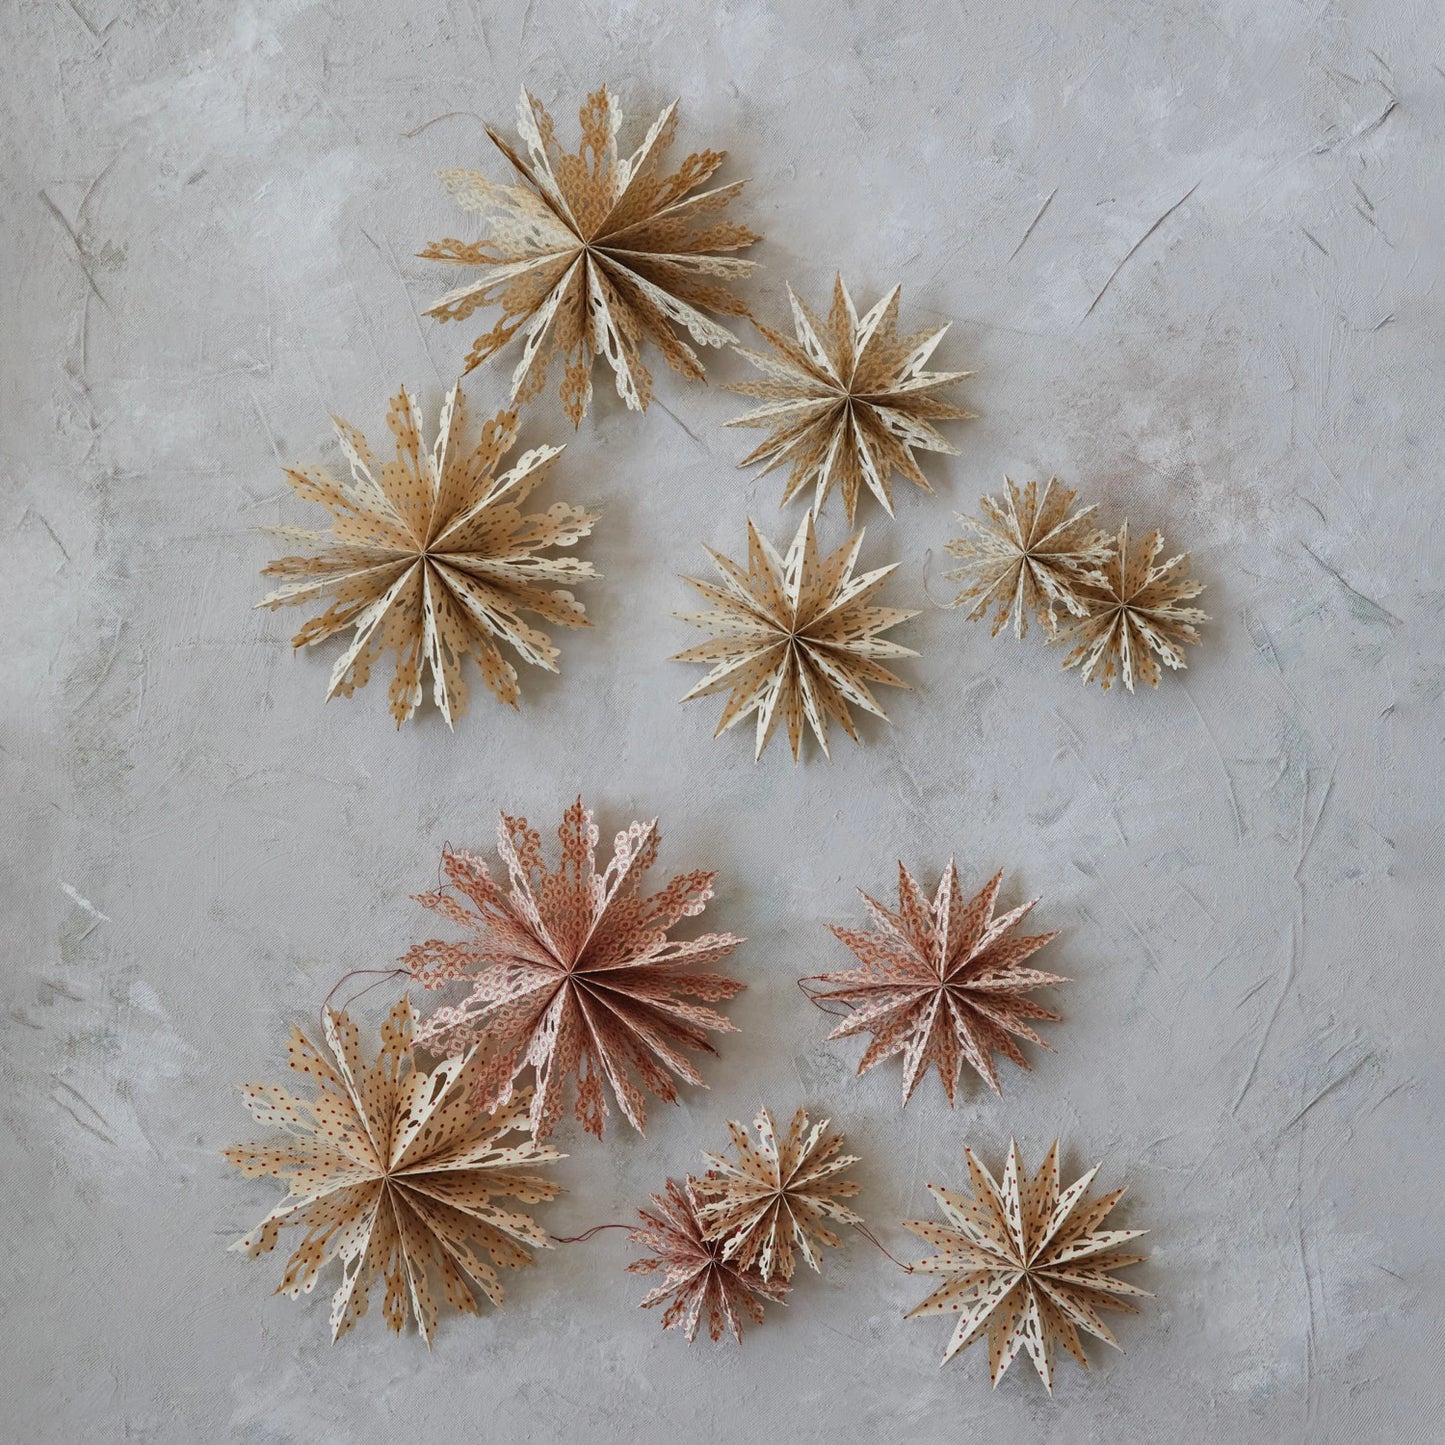 Handmade Recycled Paper Snowflake Ornaments